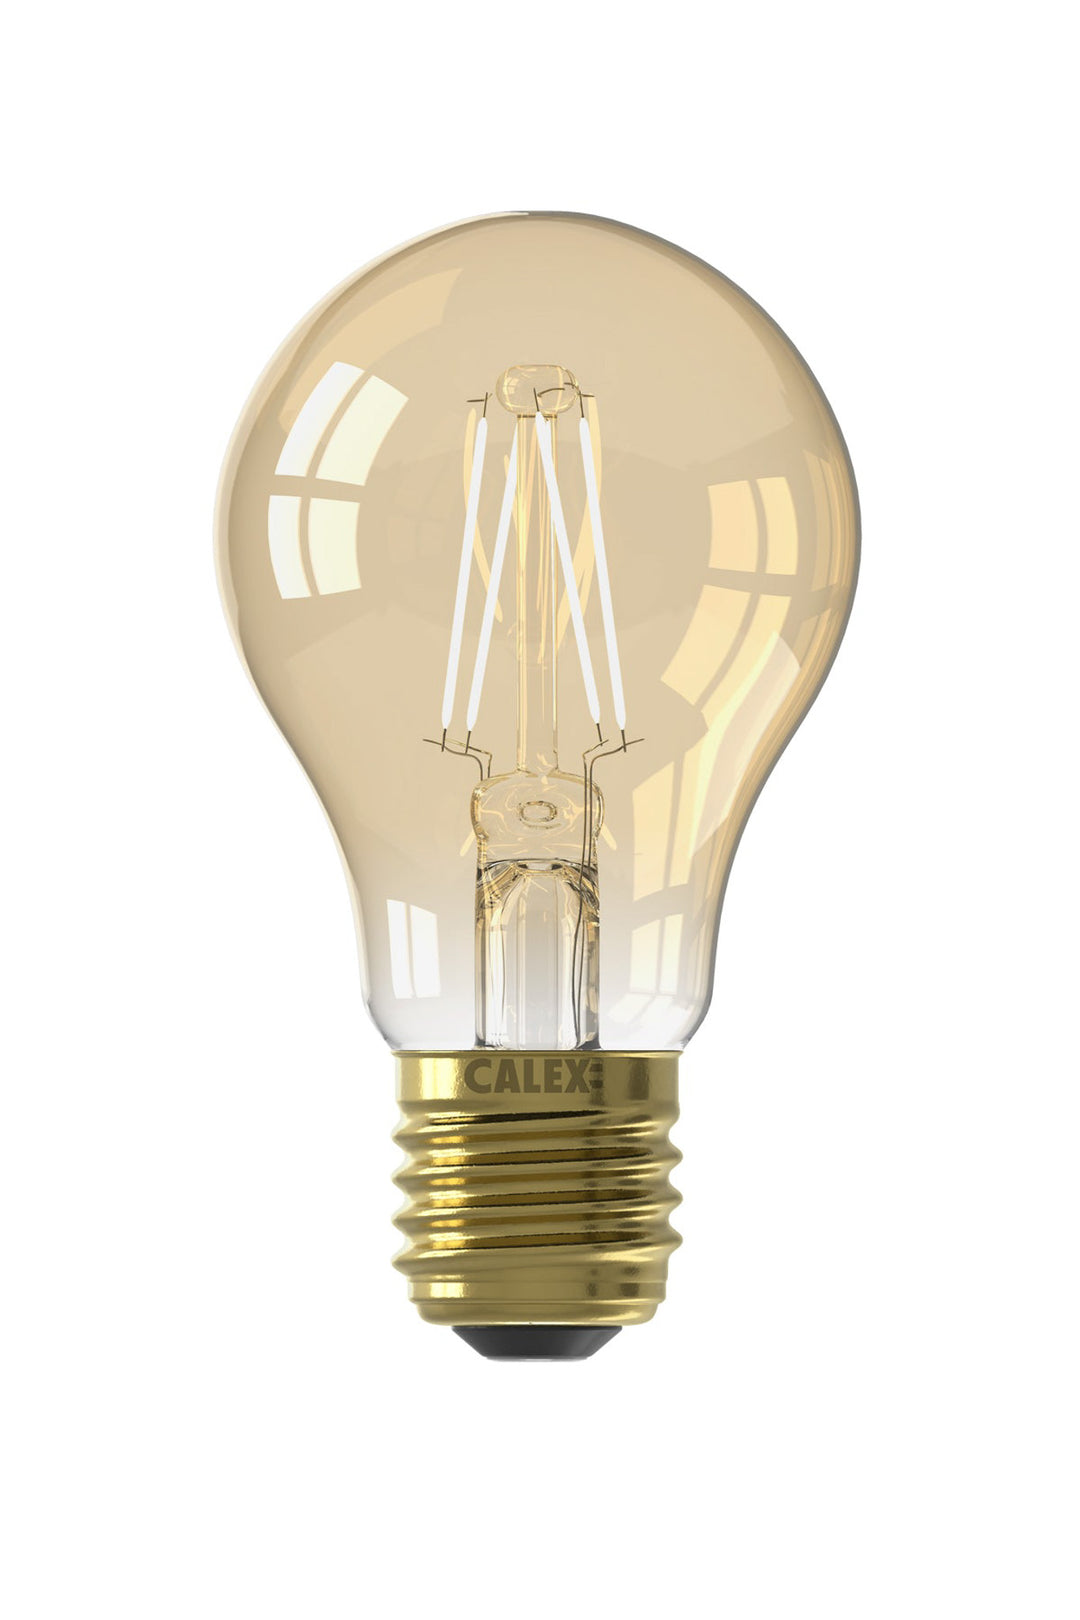 Calex LED Warm Filament GLS Lamp A60, Gold, E27, Dimmable 1101006500